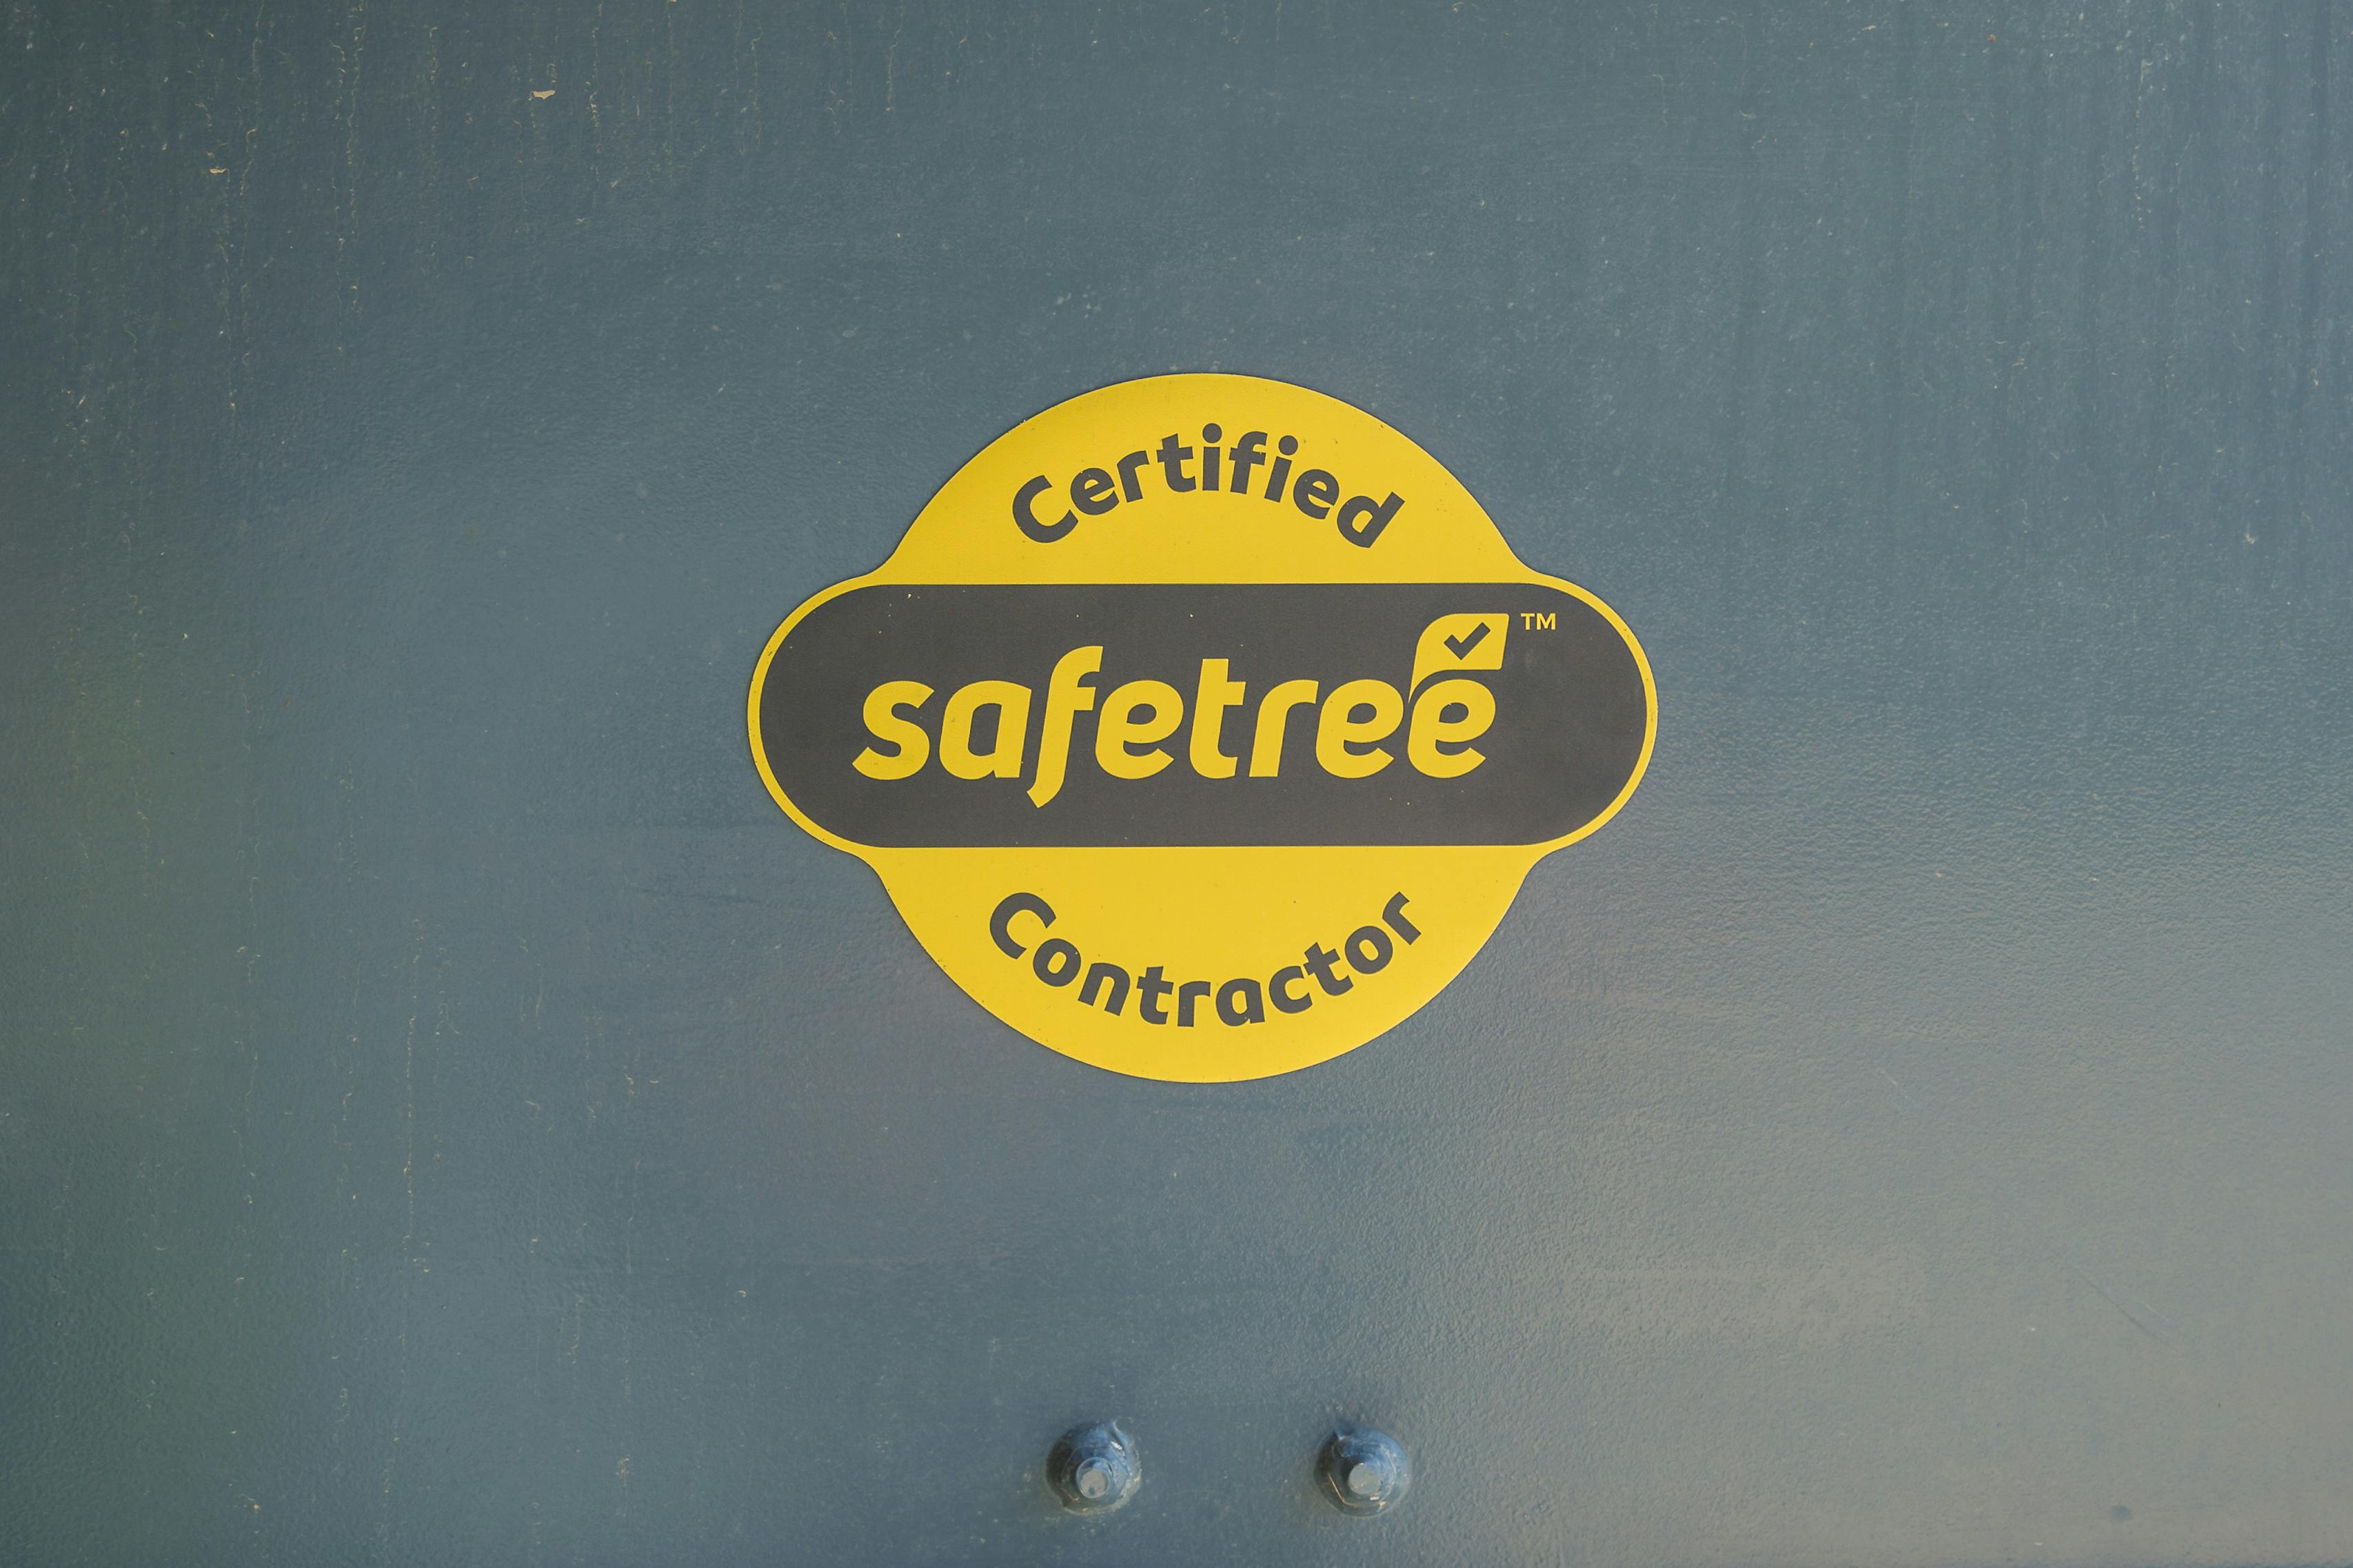 certified safetree contractor logo on metal background.